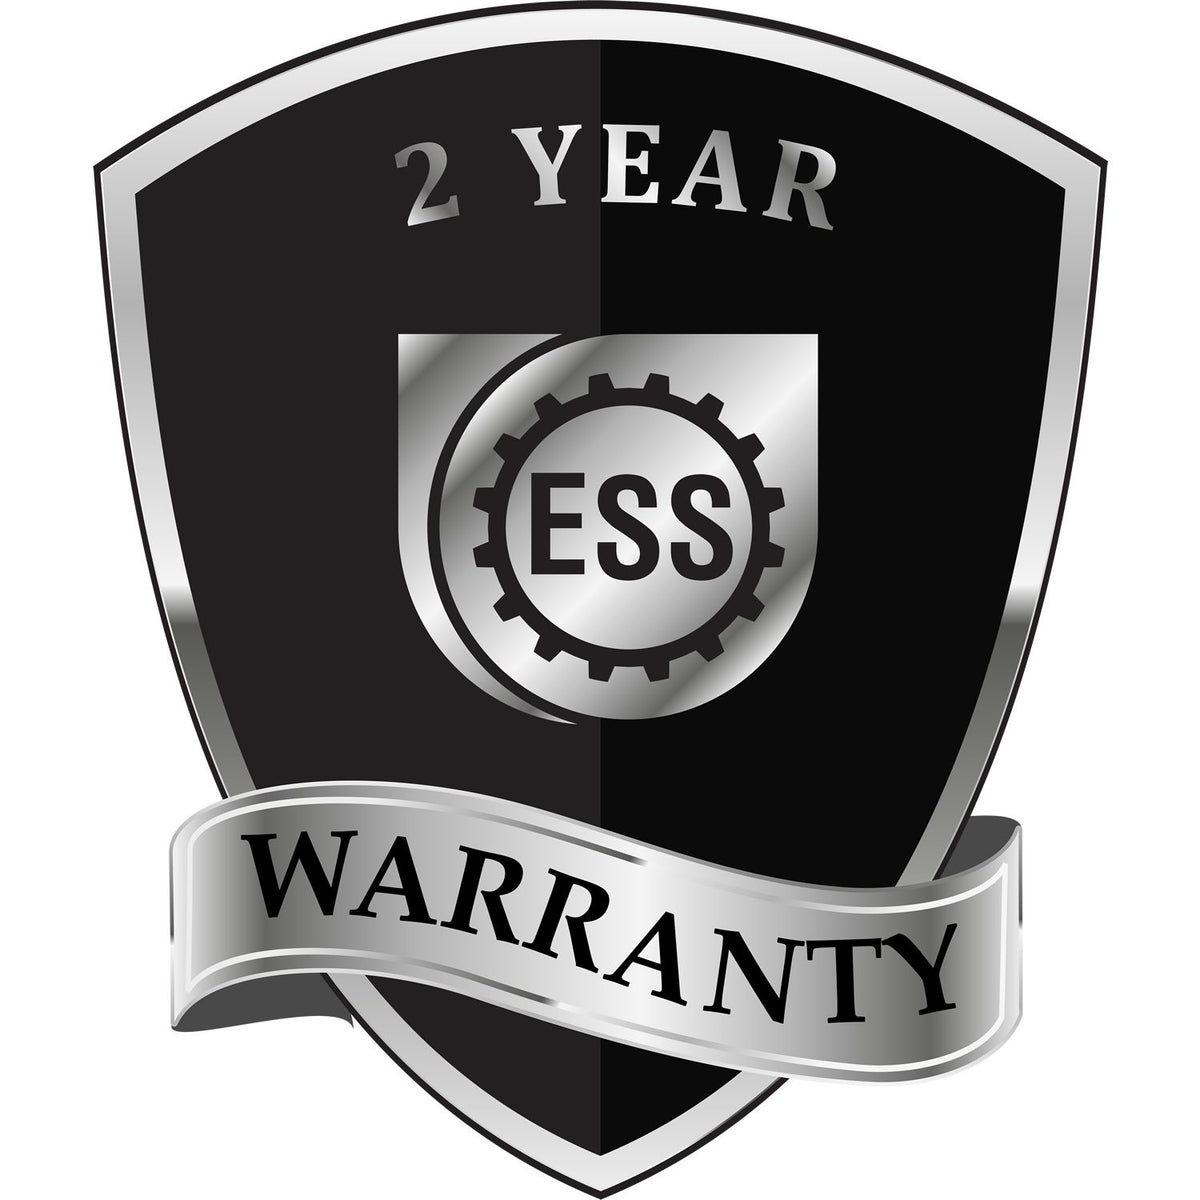 A badge or emblem showing a warranty icon for the New Hampshire Desk Architect Embossing Seal